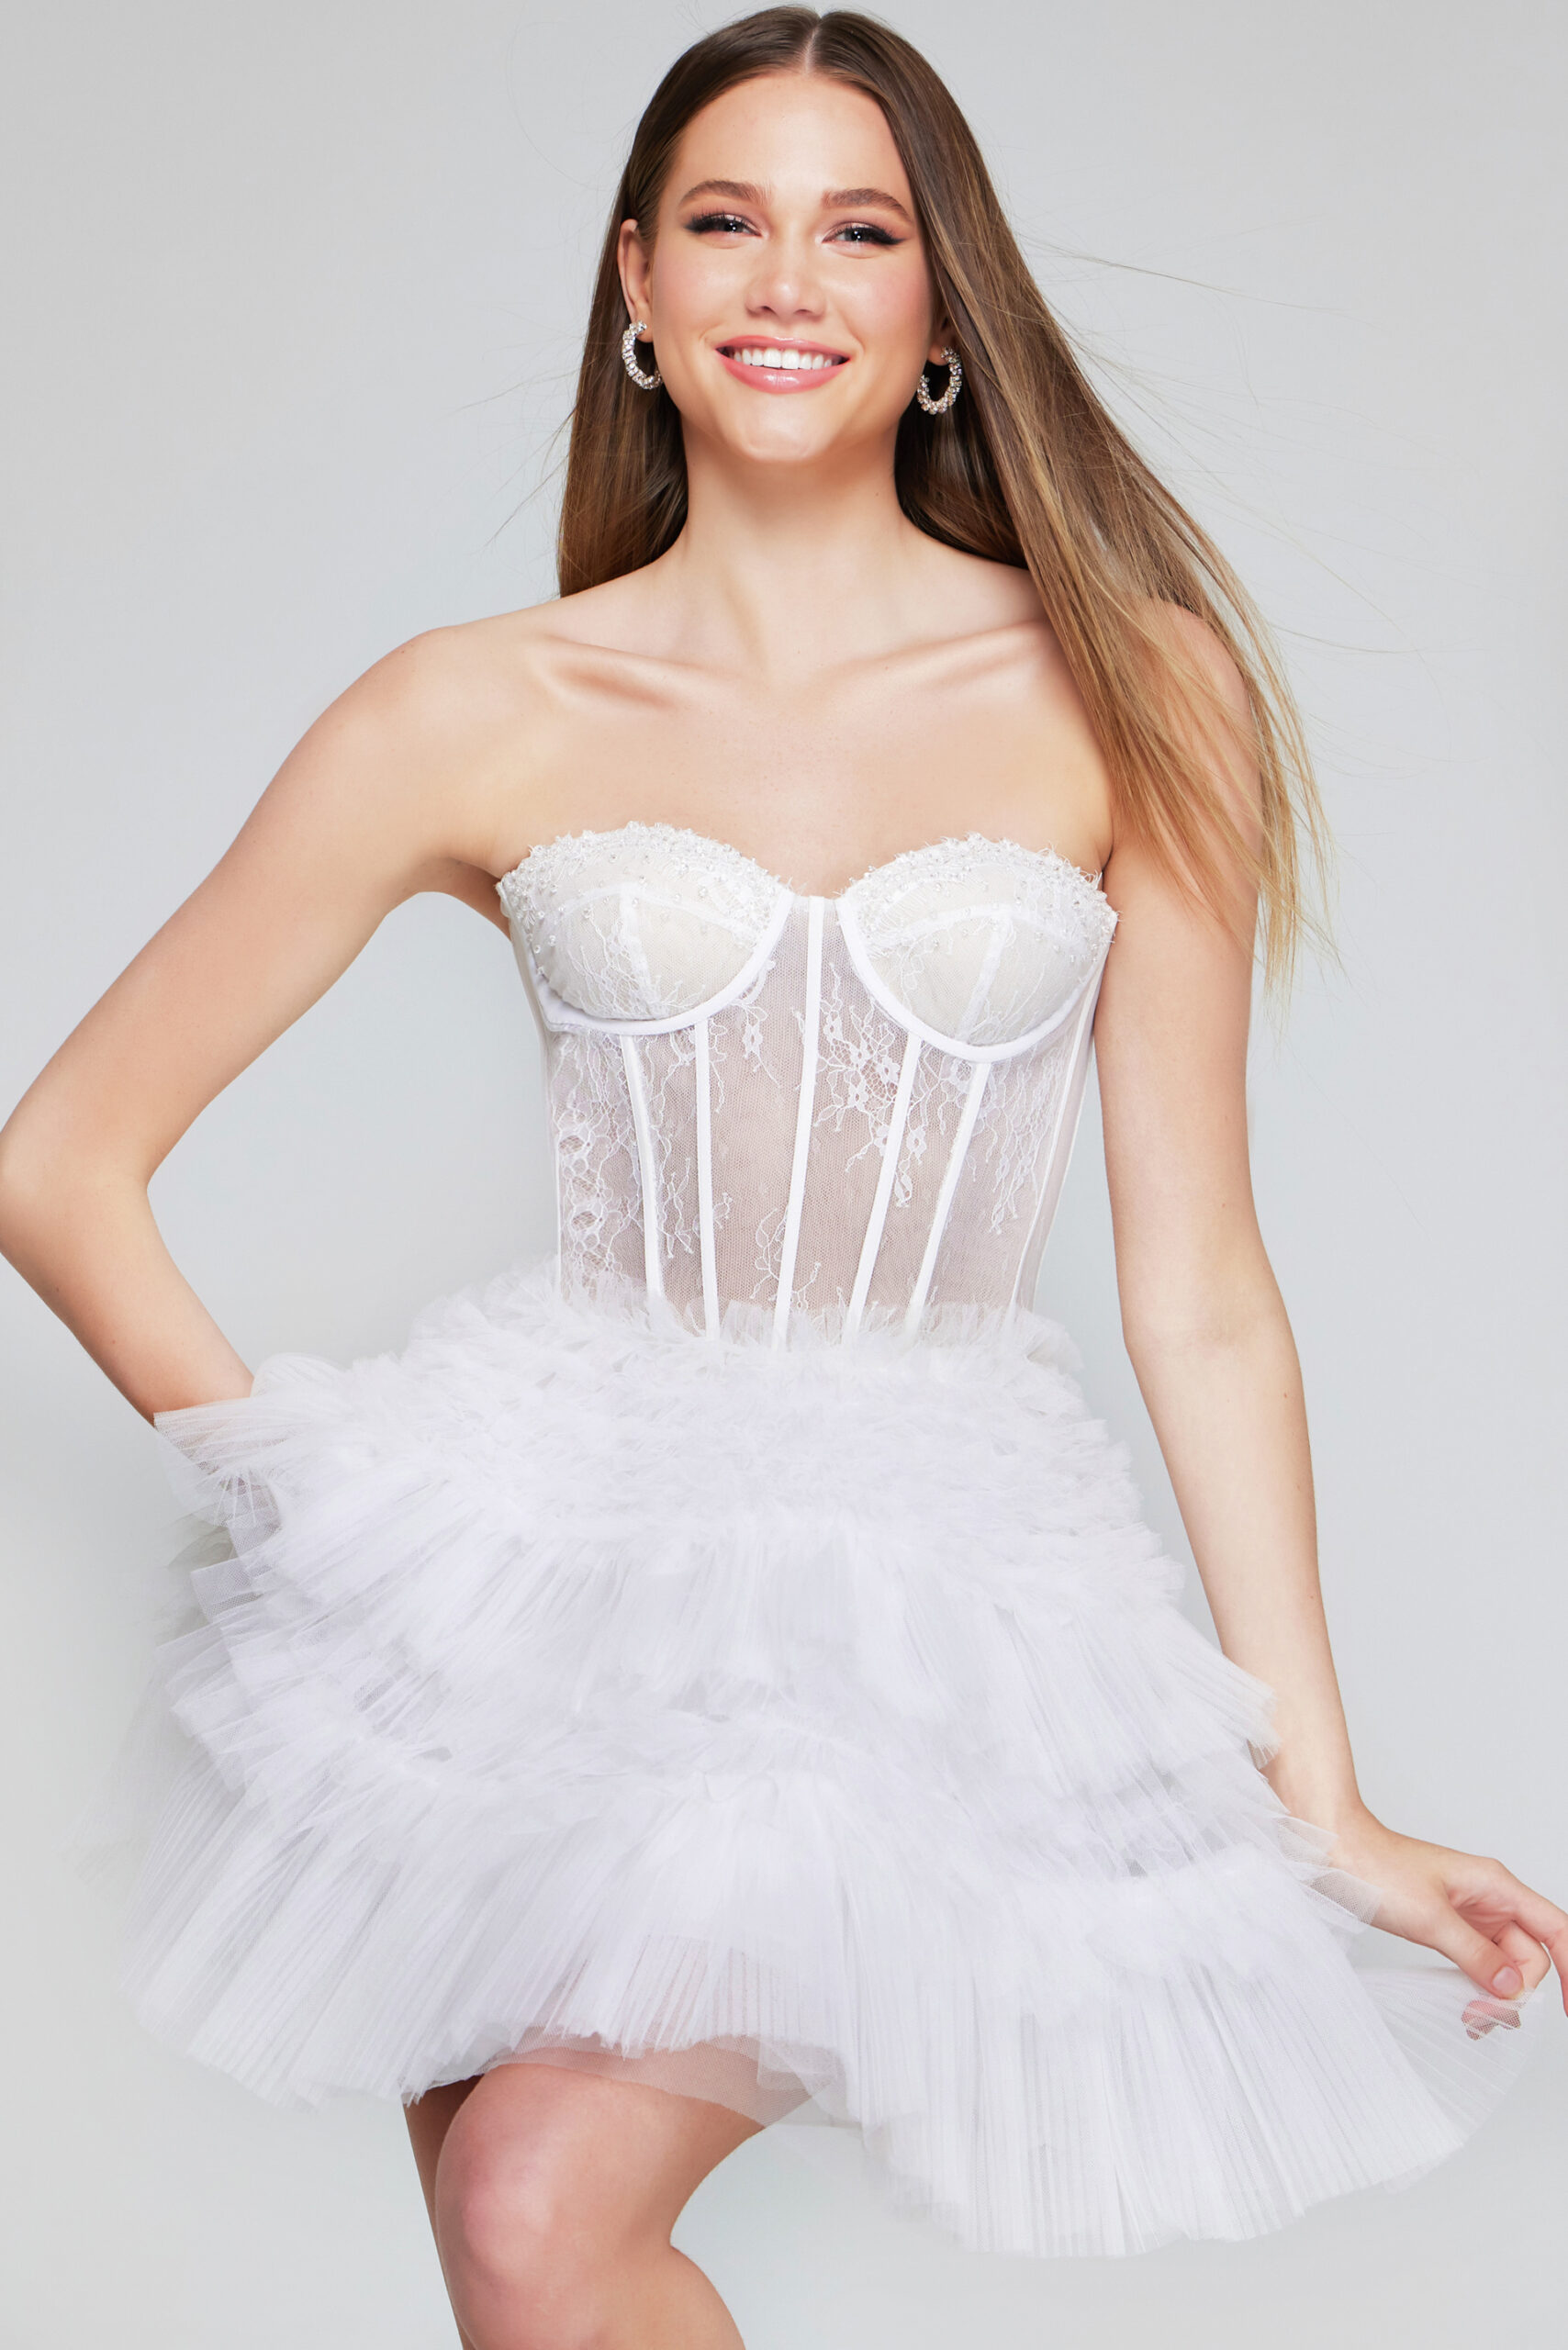 Exquisite Off-White Strapless Lace and Tulle Mini Dress 40580